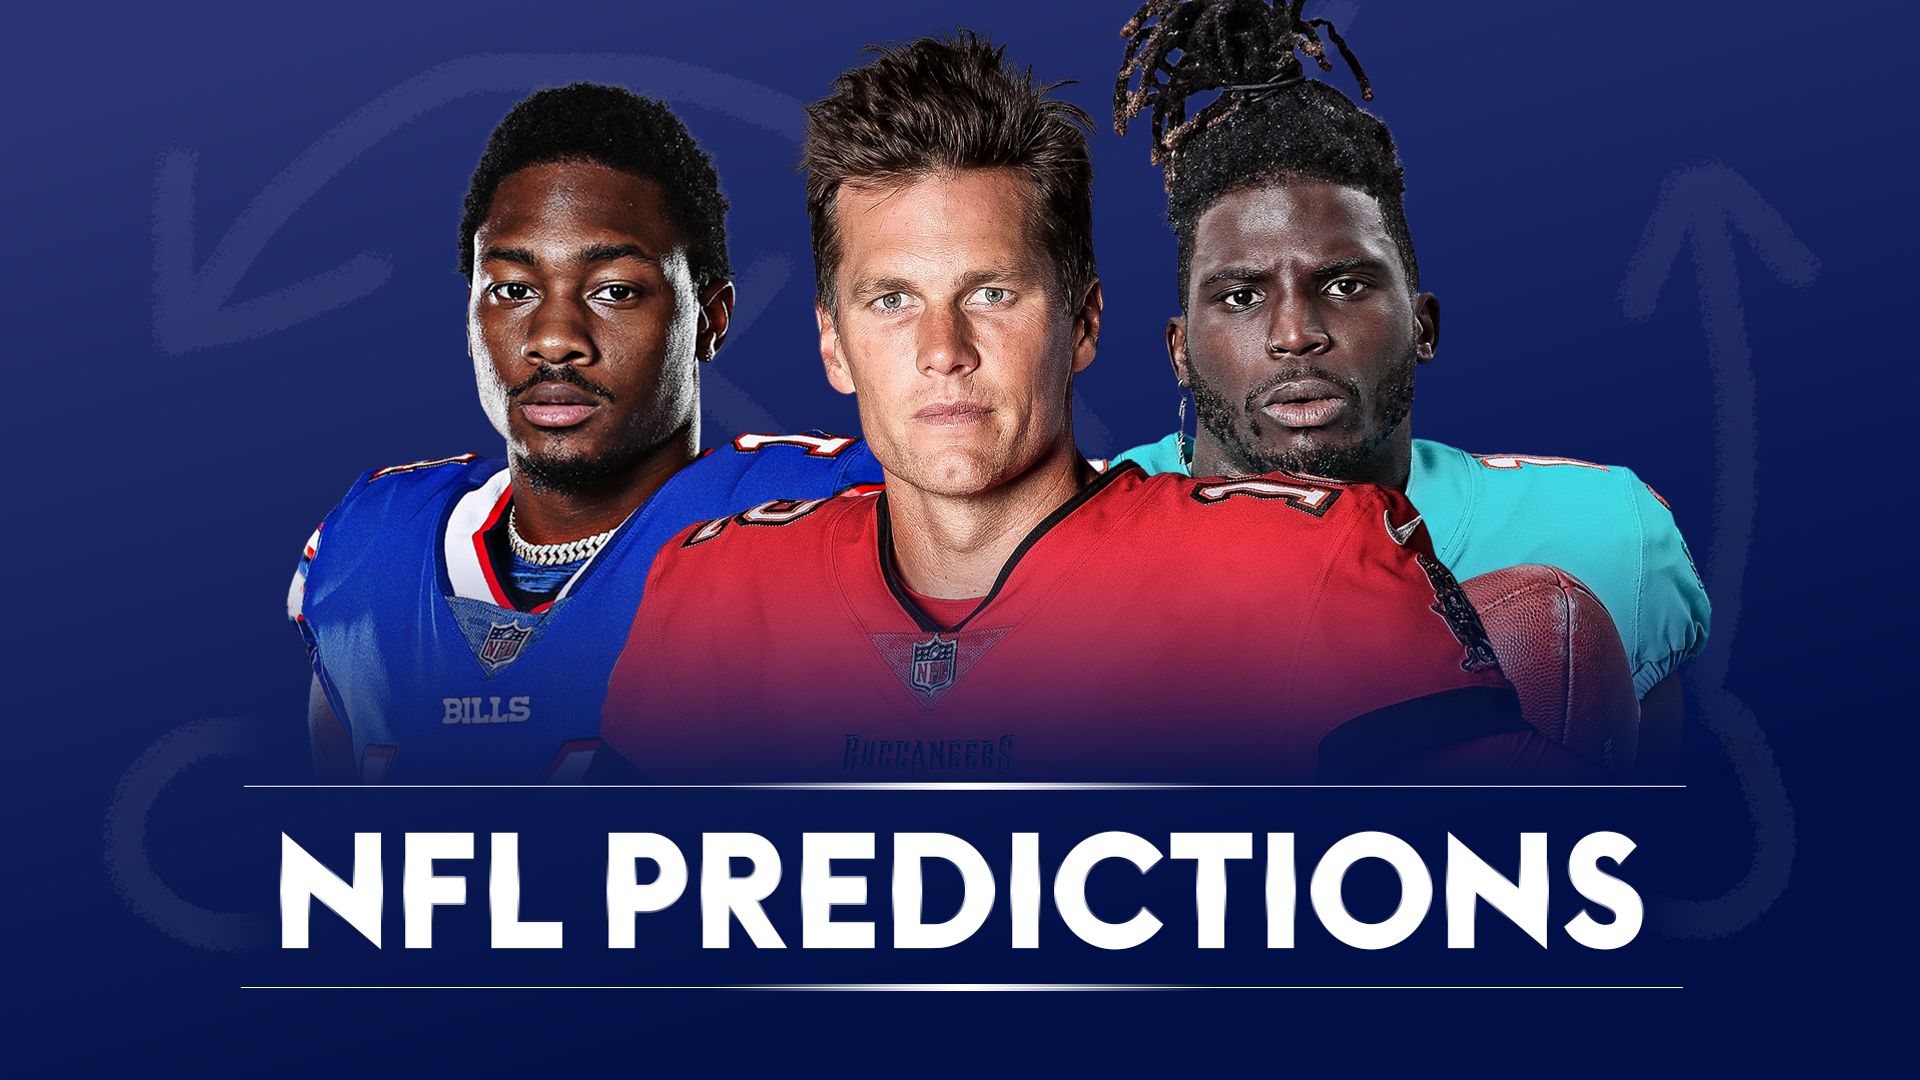 NFL Predictions | Which teams will triumph on Super Wild Card Weekend?